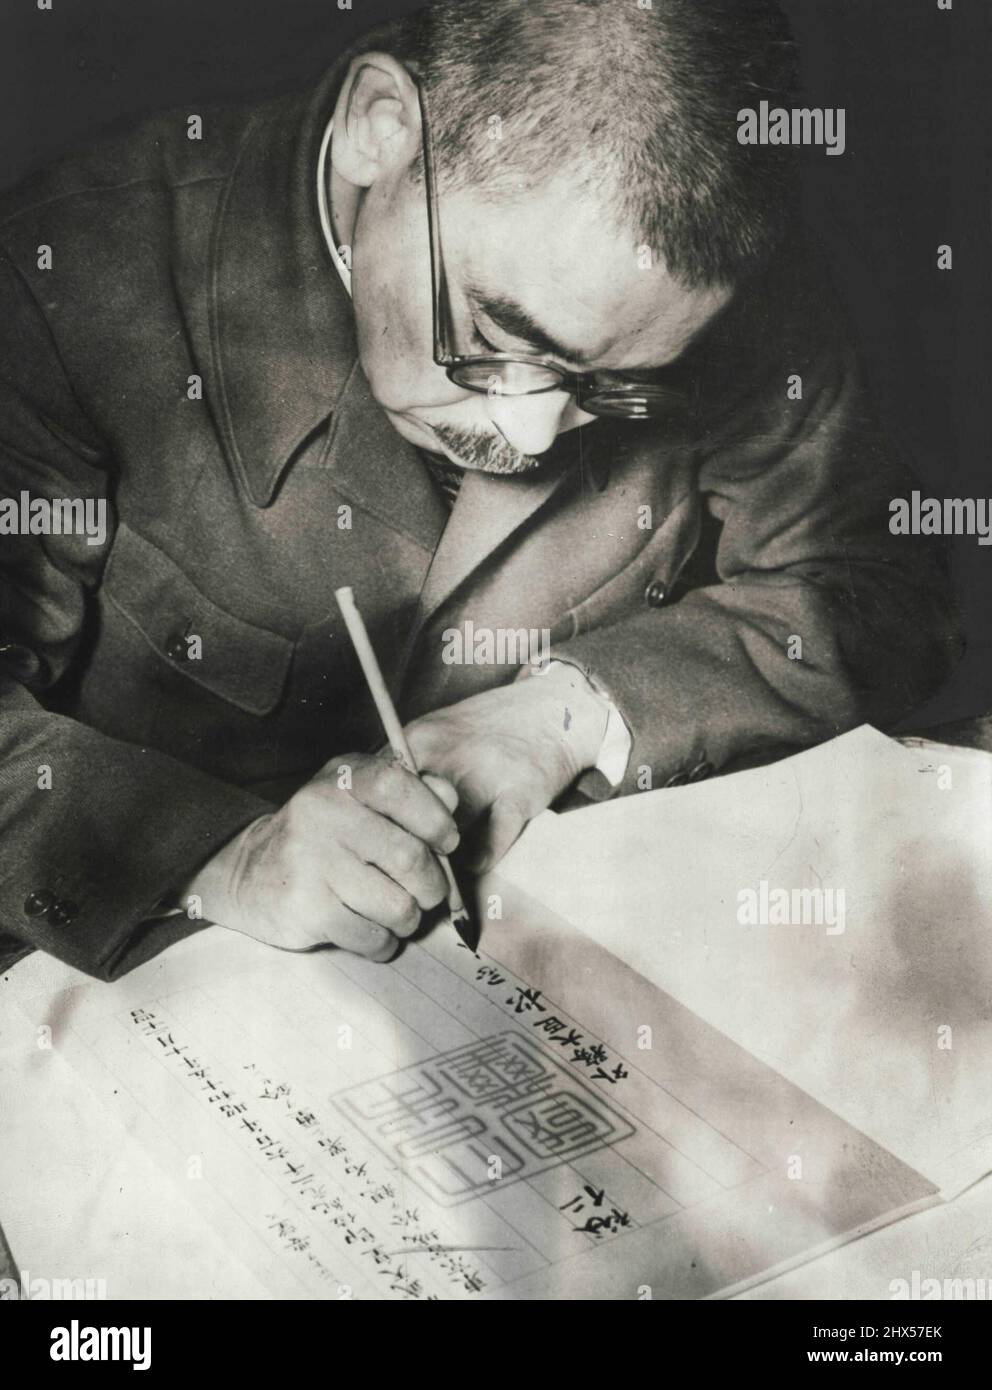 Signing Proclamation -- Foreign Minister Yosuke Matsuoka signs Dec. 29 in Tokyo a Proclamation for the 2, 600th anniversary of the Japanese empire. Matsuoka is dressed in the National Uniform. January 15, 1941. (Photo by Associated Press Photo). Stock Photo